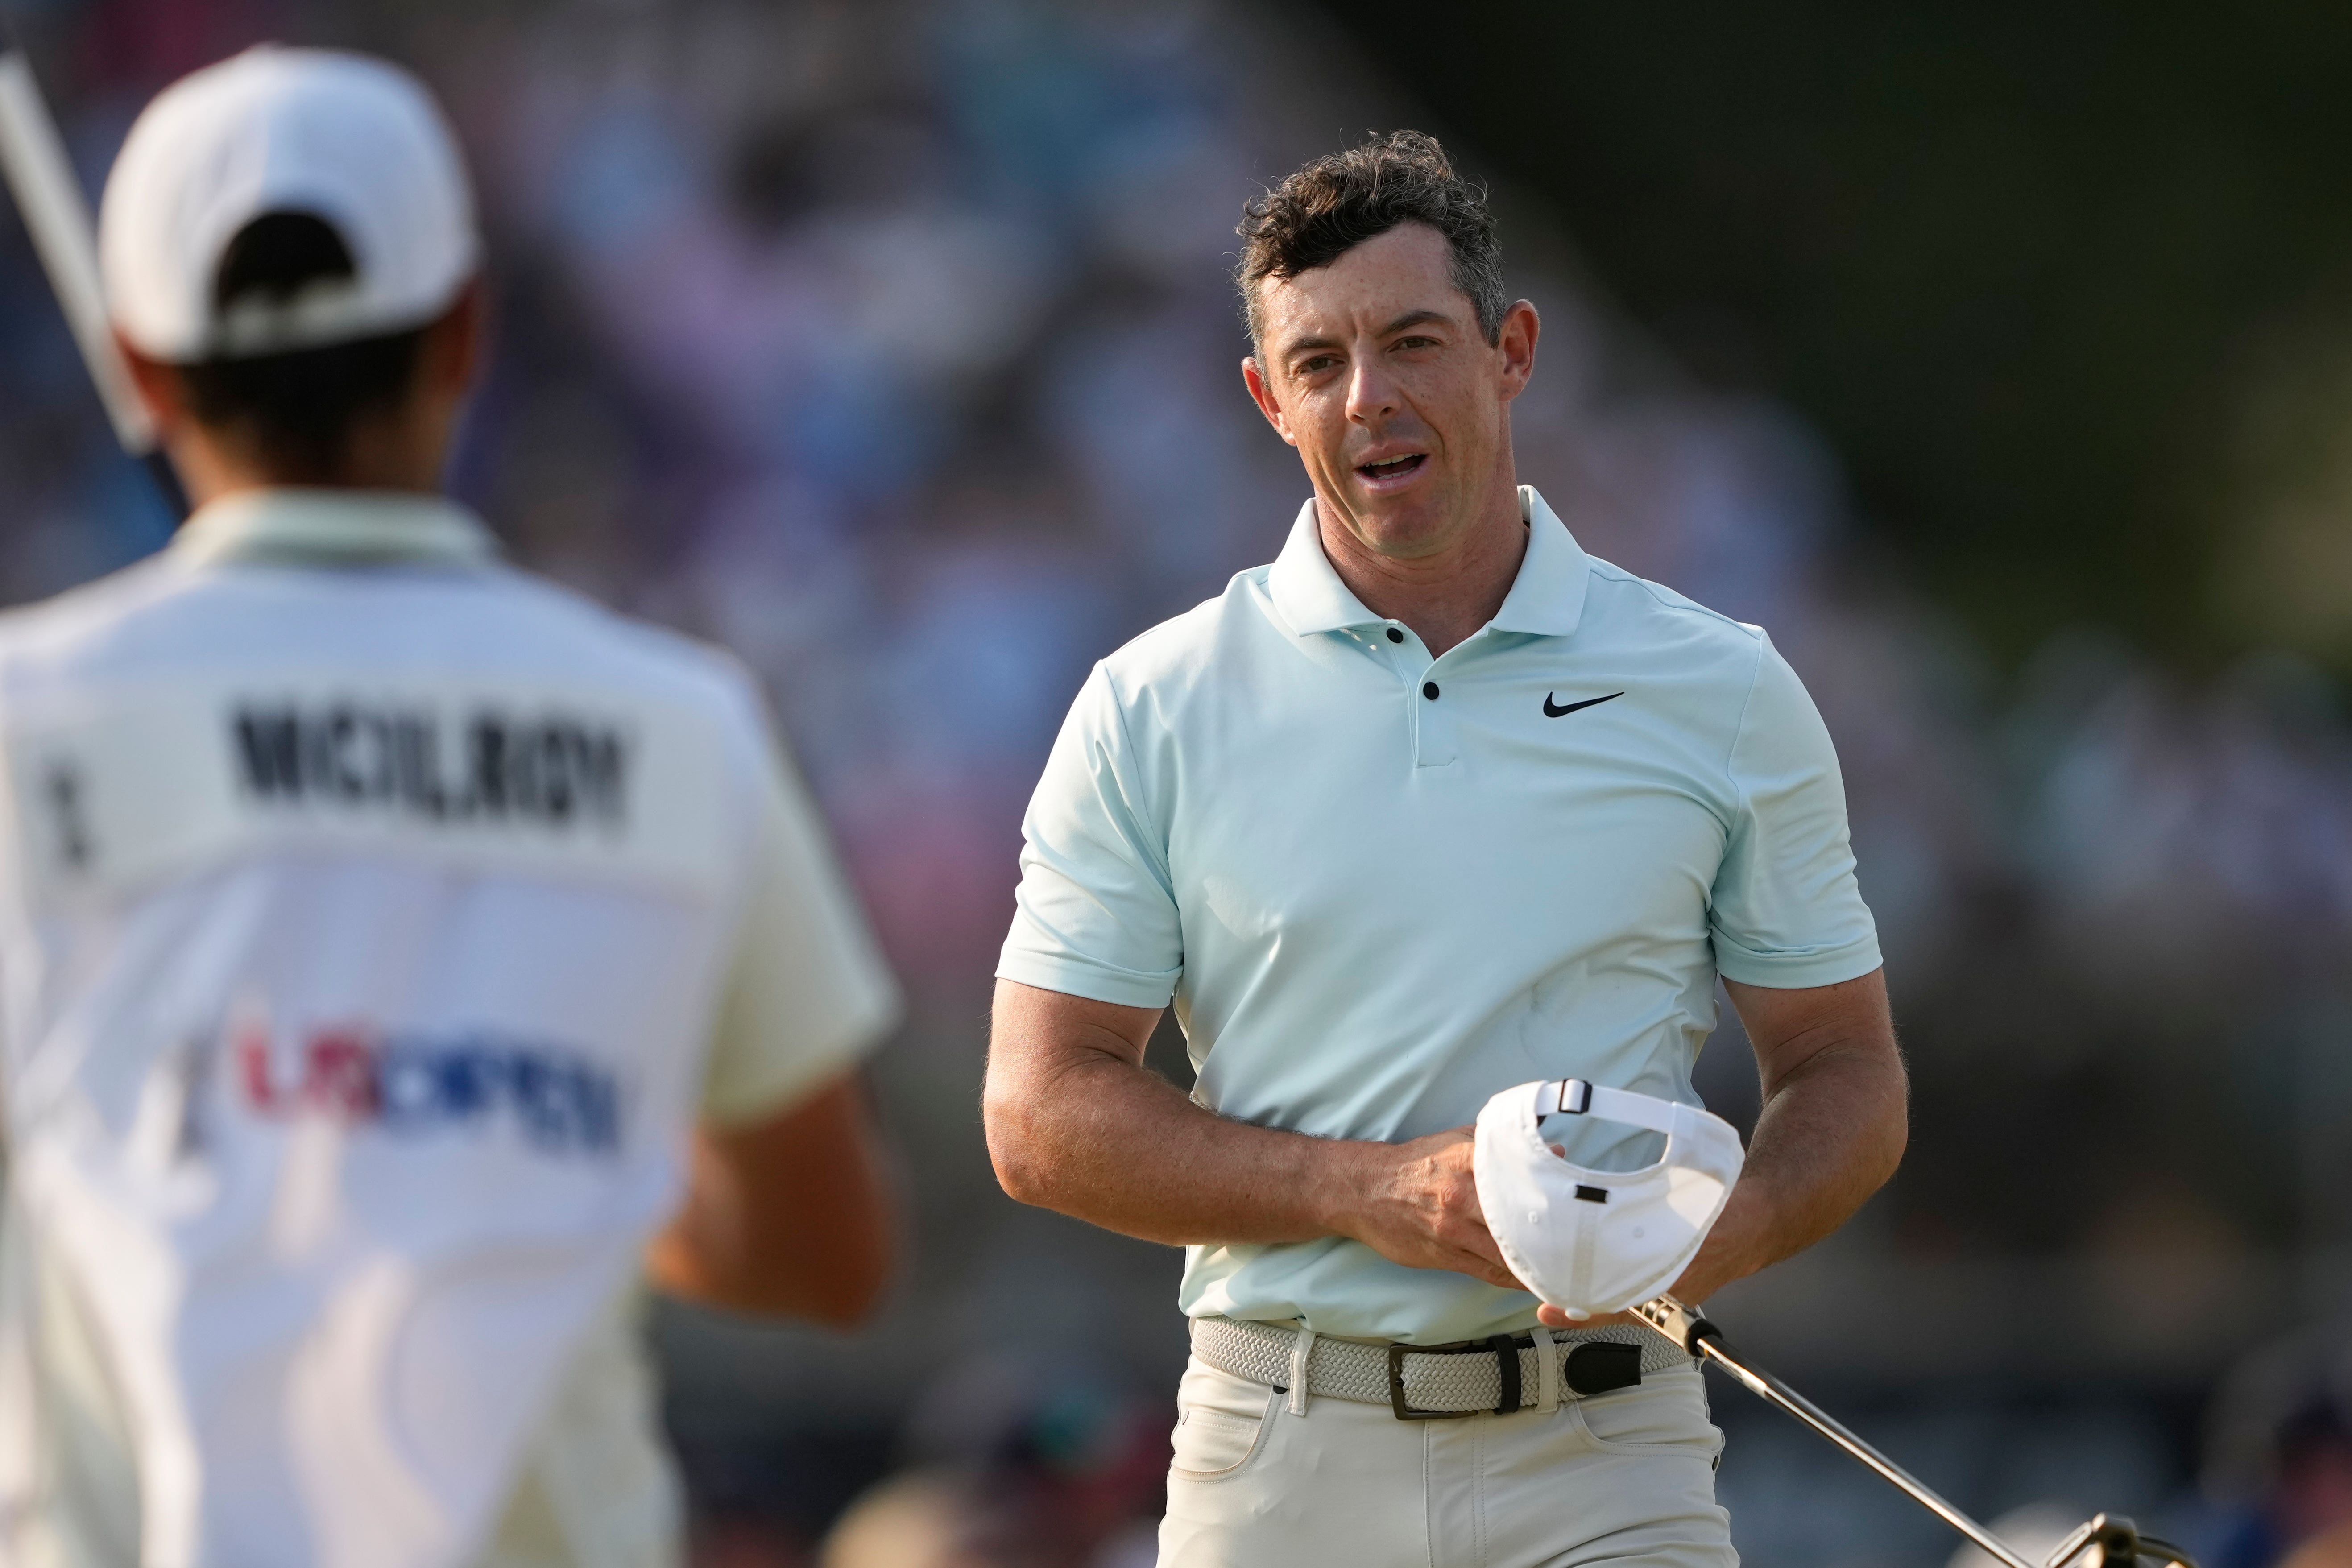 Rory McIlroy bogeyed three of the last four holes to squander his best chance of a major title since 2014